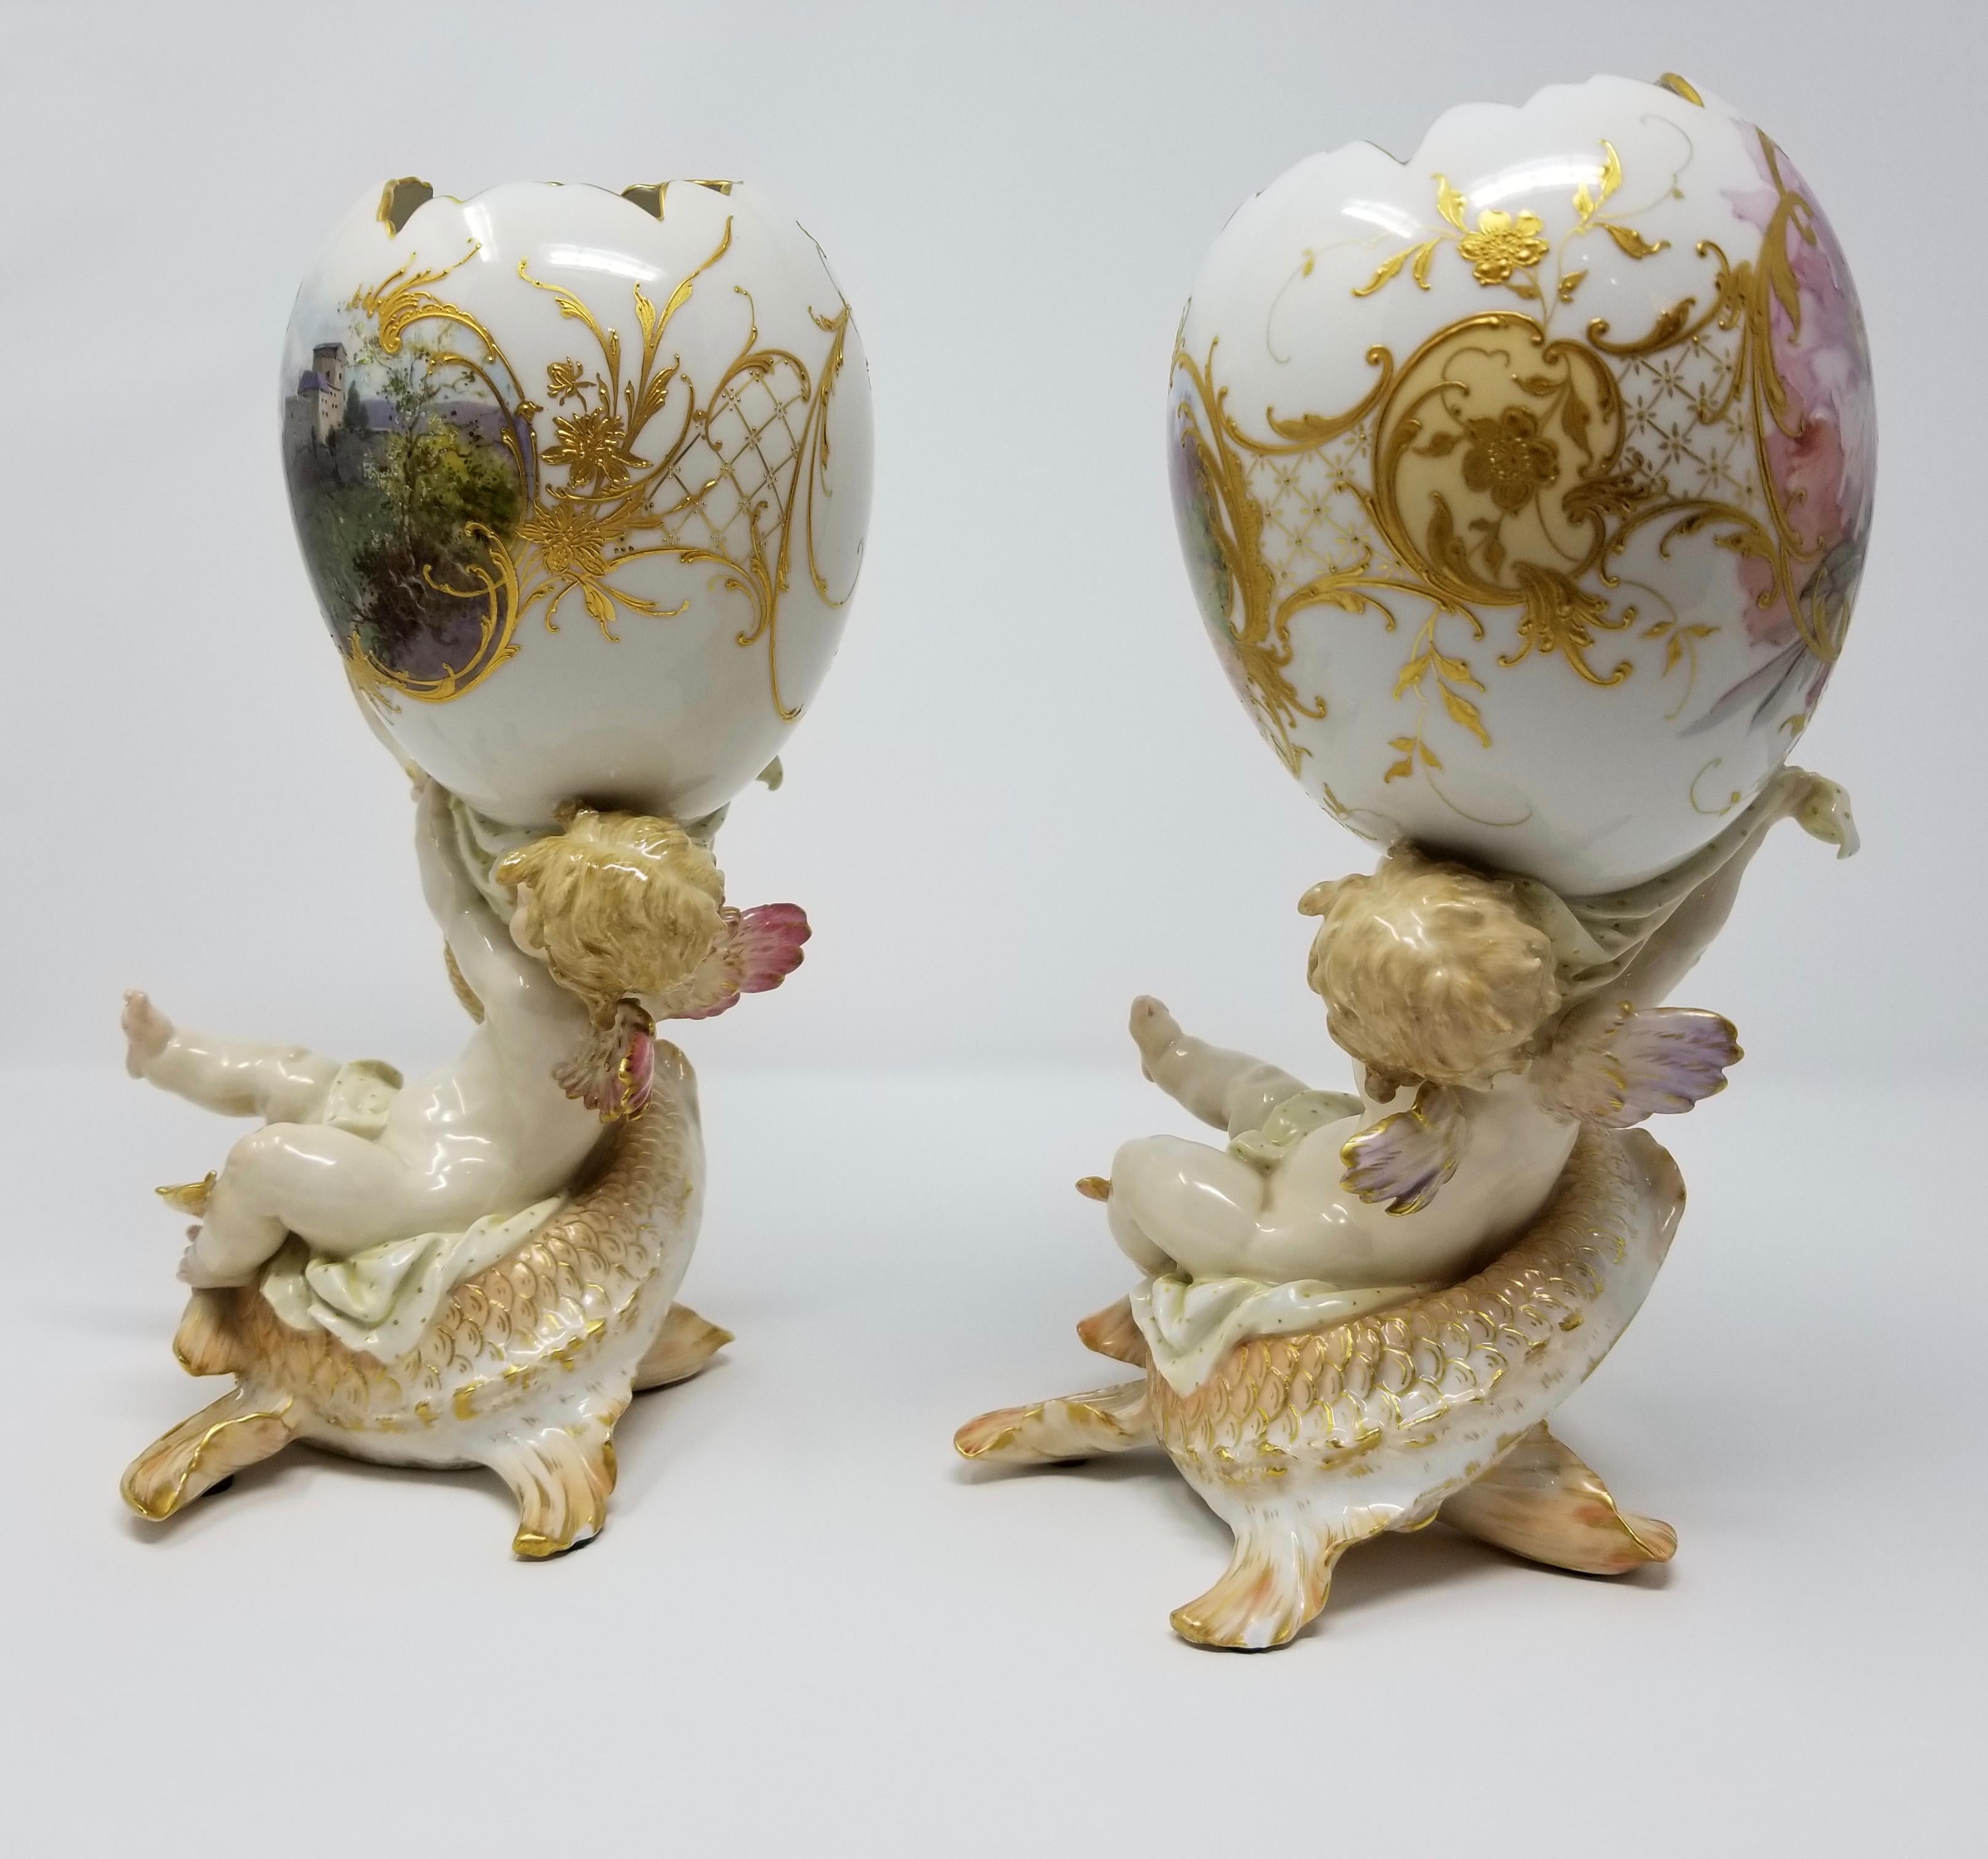 A fine pair of antique Berlin KPM figural porcelain egg shaped vases with cupids riding dolphins and Weichmalerei decor. Each pair is beautifully hand painted with bouquets of flowers, landscape and castle designs, and further elaborated with hand